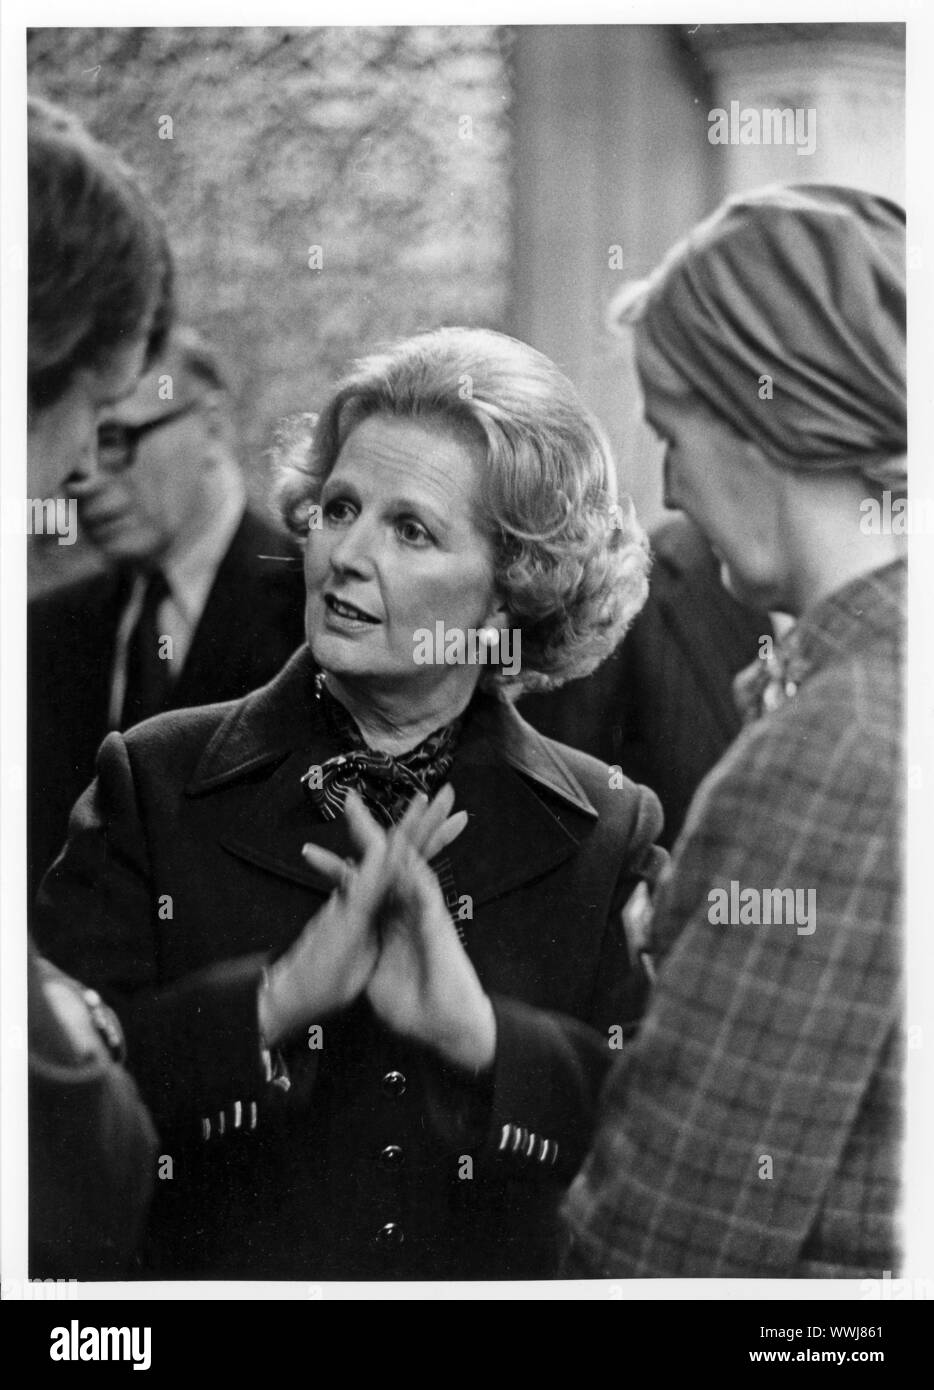 Margaret Hilda Thatcher, Baroness Thatcher, also known as the Iron Lady was a British stateswoman who served as Prime Minister of the United Kingdom from 1979 to 1990 and Leader of the Conservative Party from 1975 to 1990. Stock Photo